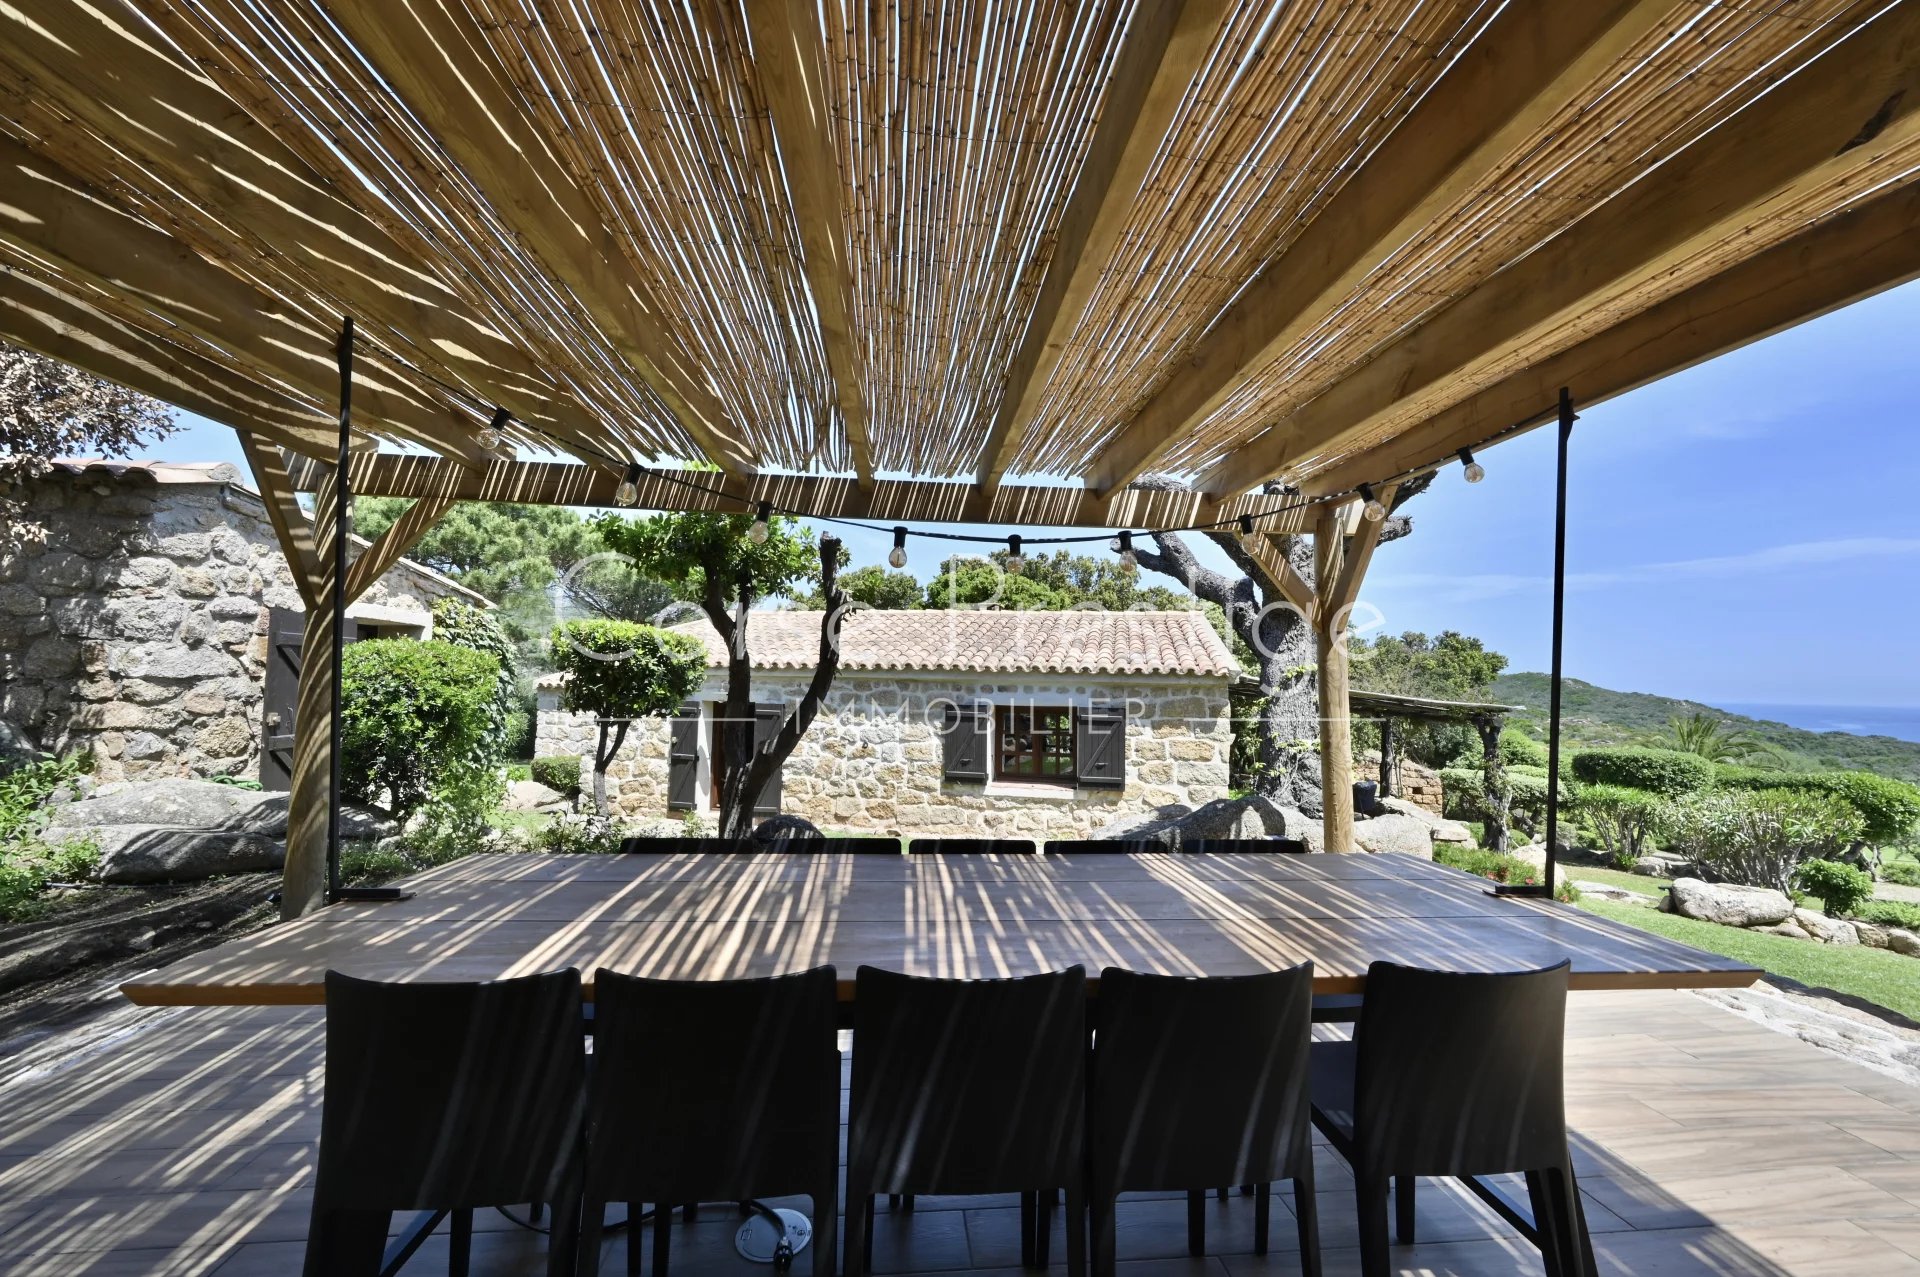 sheepfold to rent in bonifacio - away from prying eyes - south corsica image6